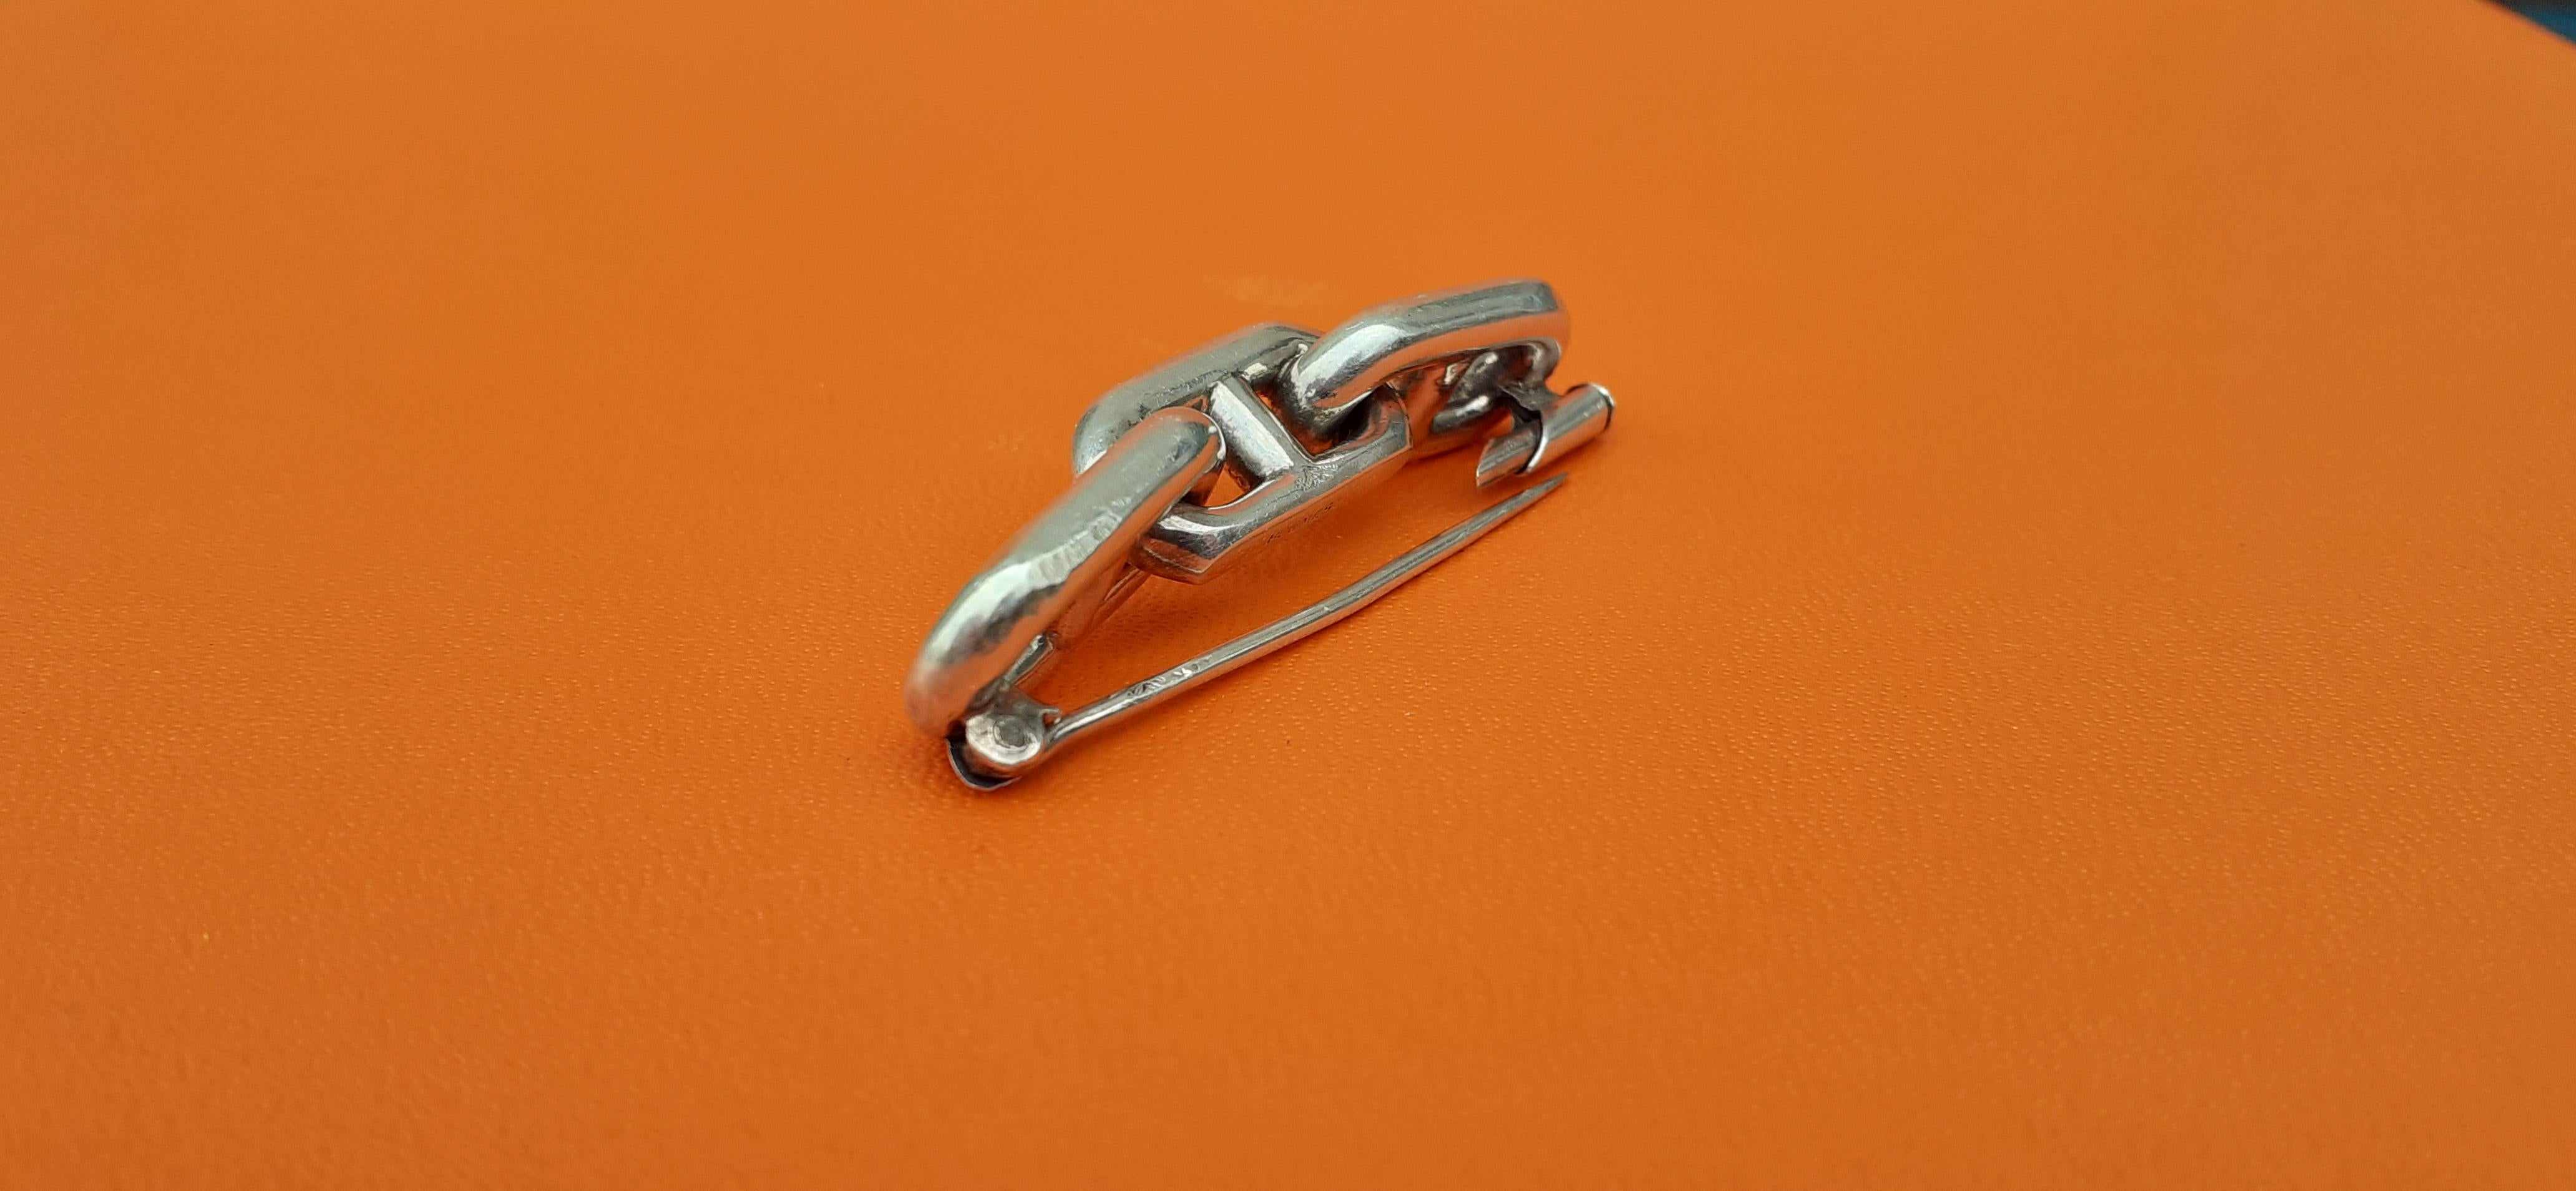 Women's Rare Hermès Vintage Chaine d'Ancre Brooch in Silver